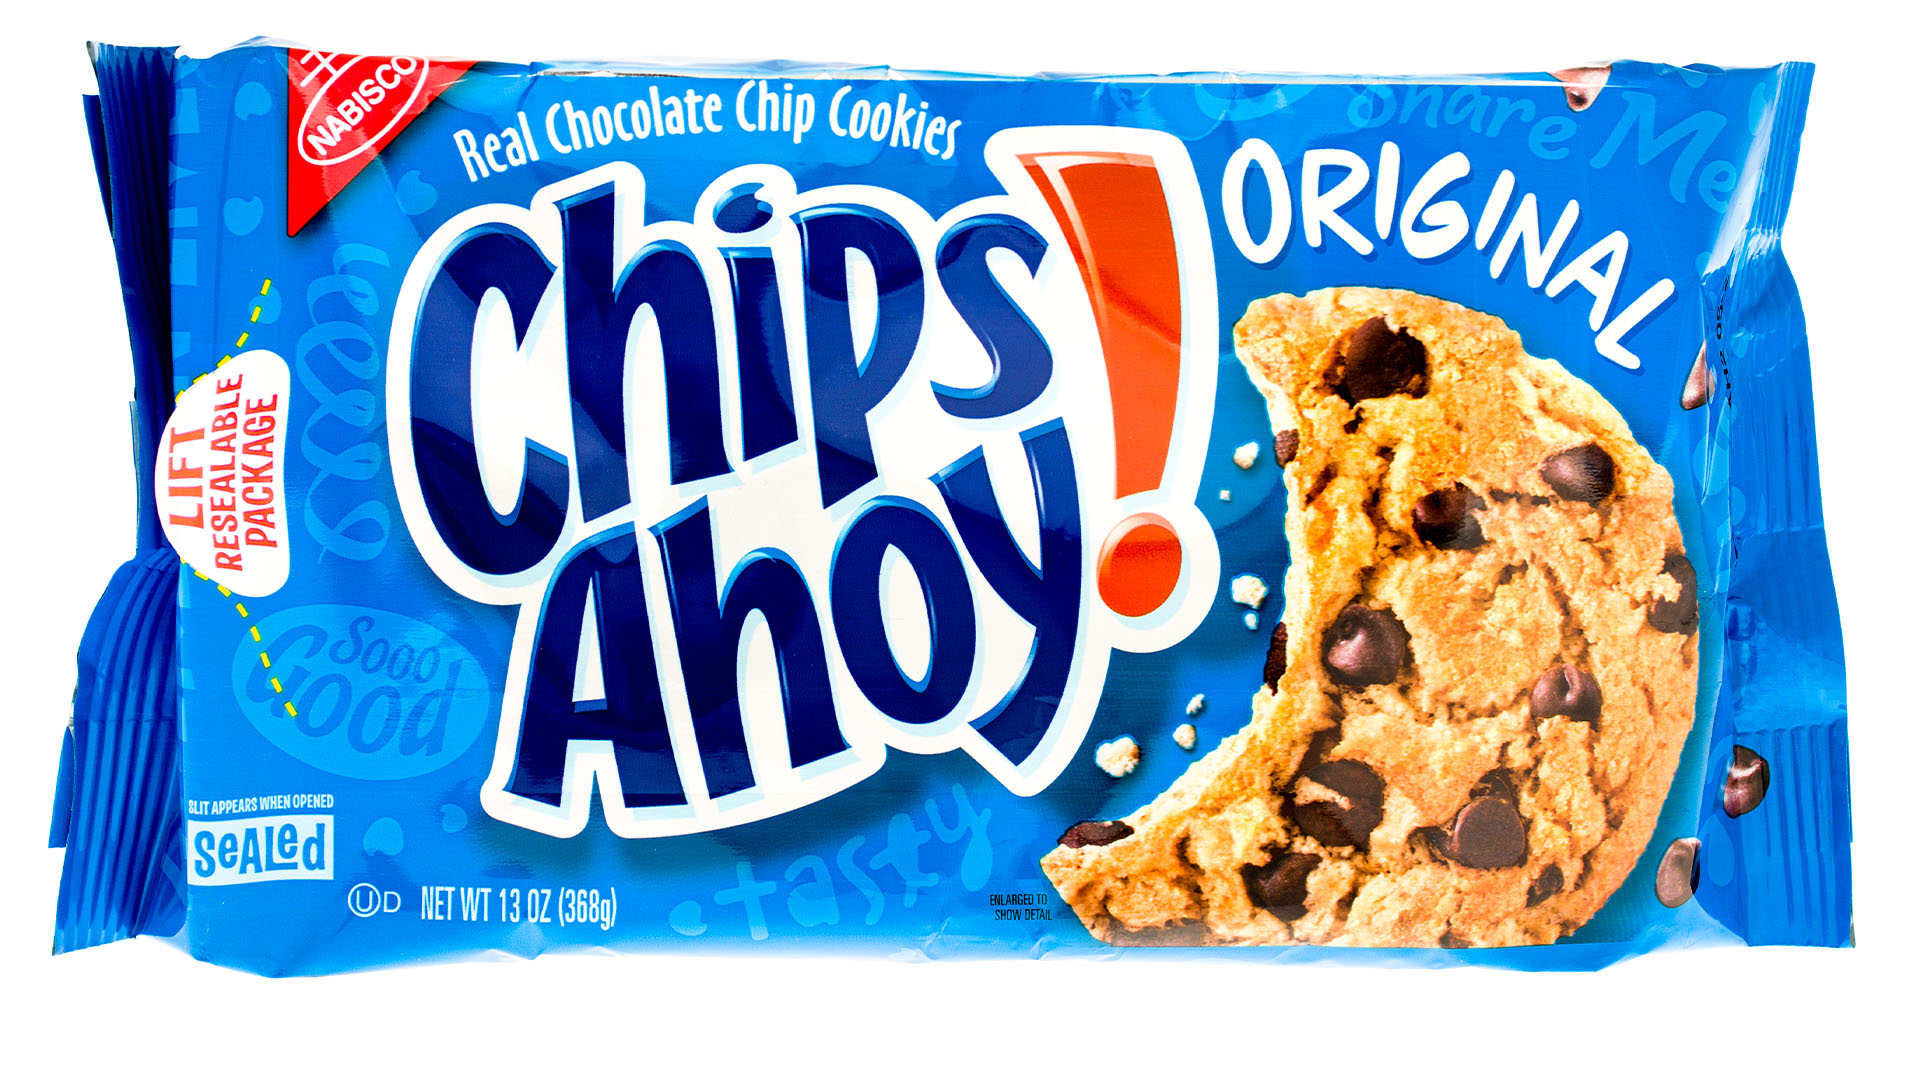 ‘Just like the original,’ say fans as Chips Ahoy launches new cookie – and it’s not going away [Video]